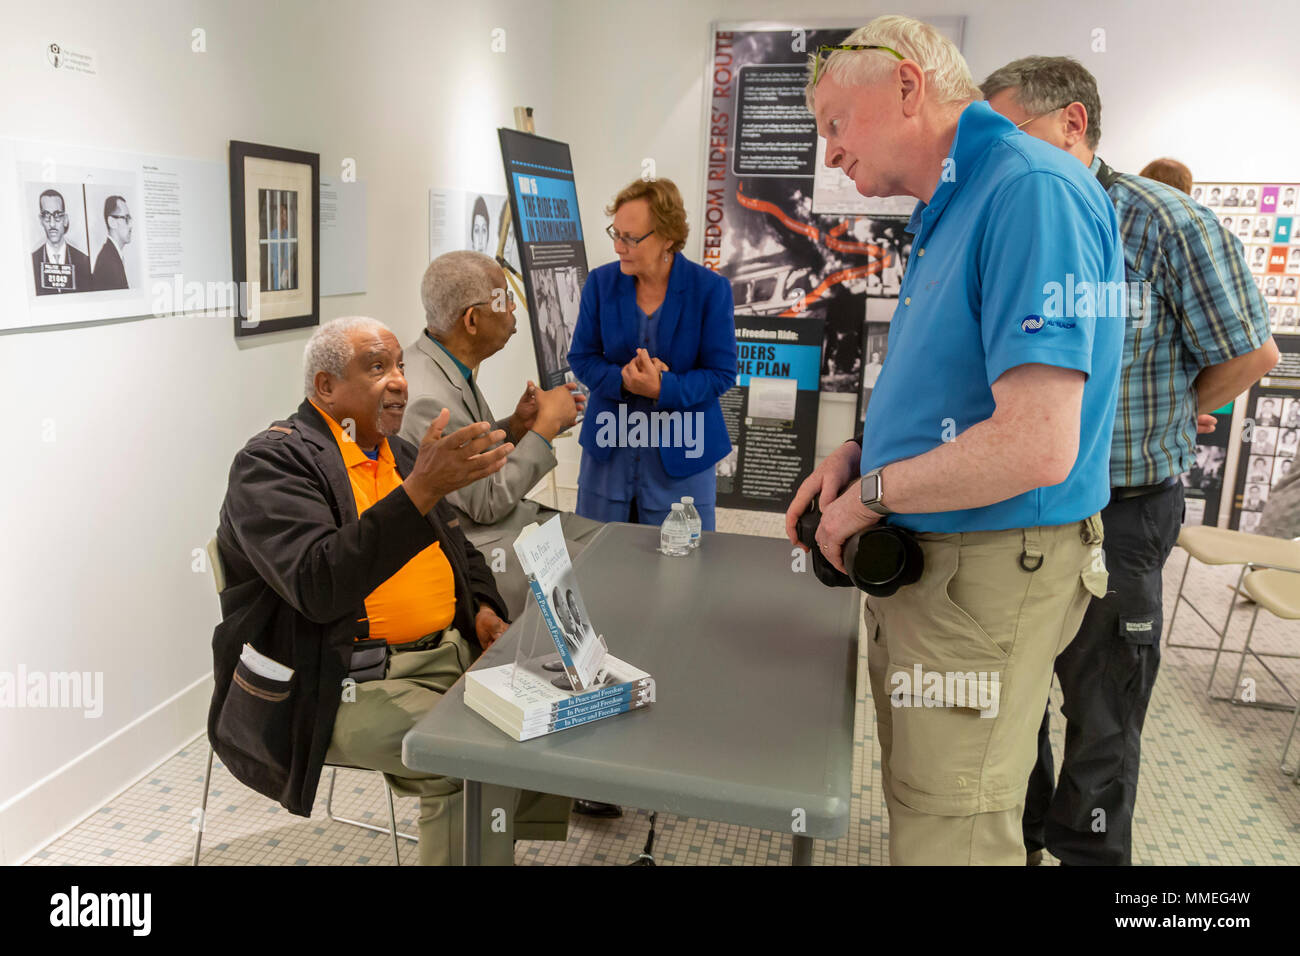 Montgomery, Alabama - Freedom Riders Bernard Lafayette (left) and Rip Patton talk with visitors to the Freedom Rides Museum. The museum is housed in t Stock Photo